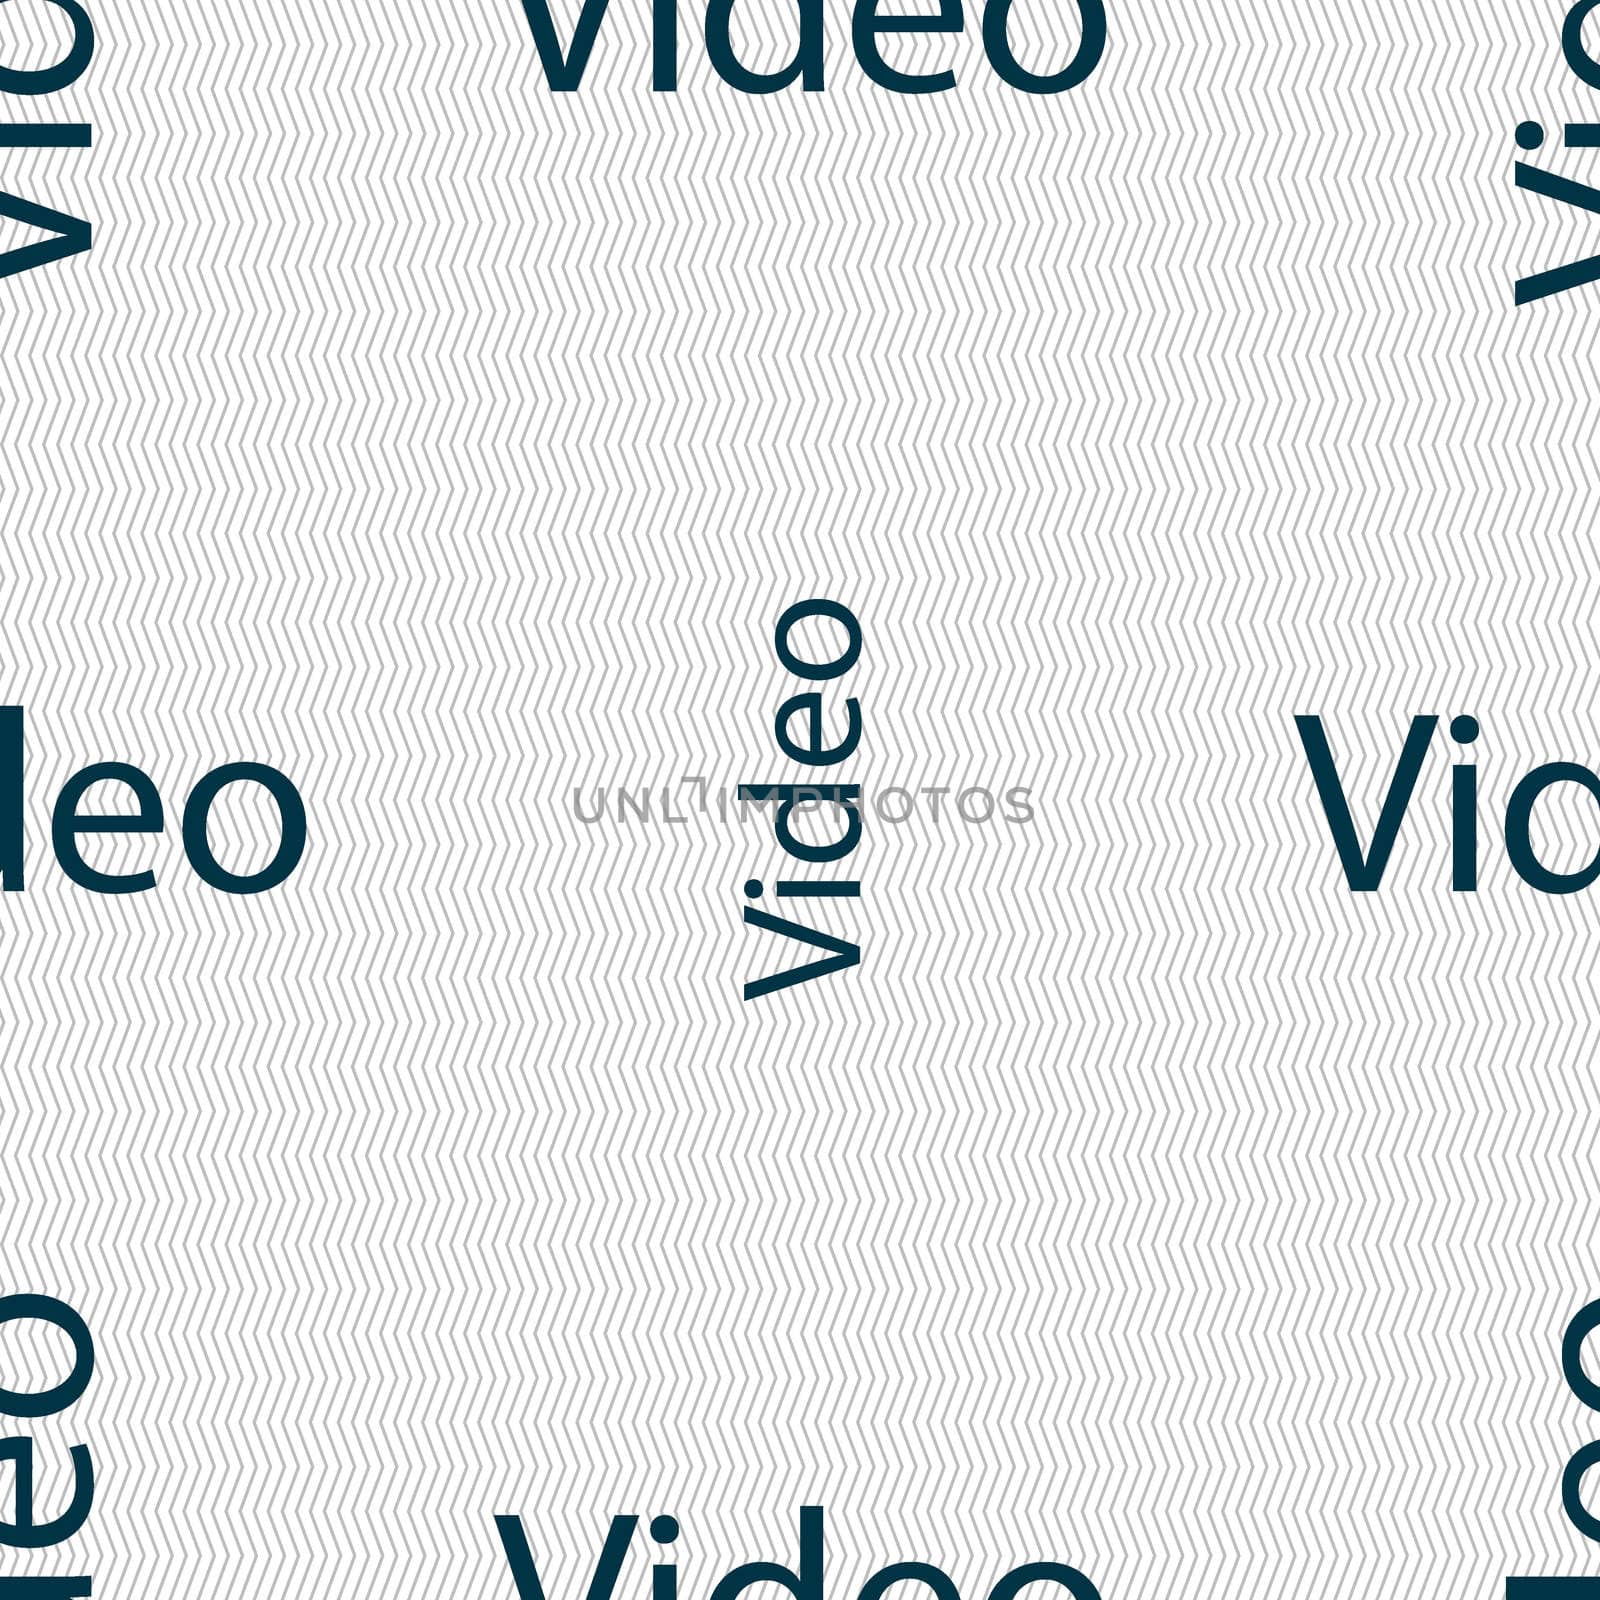 Play video sign icon. Player navigation symbol. Seamless abstract background with geometric shapes.  by serhii_lohvyniuk